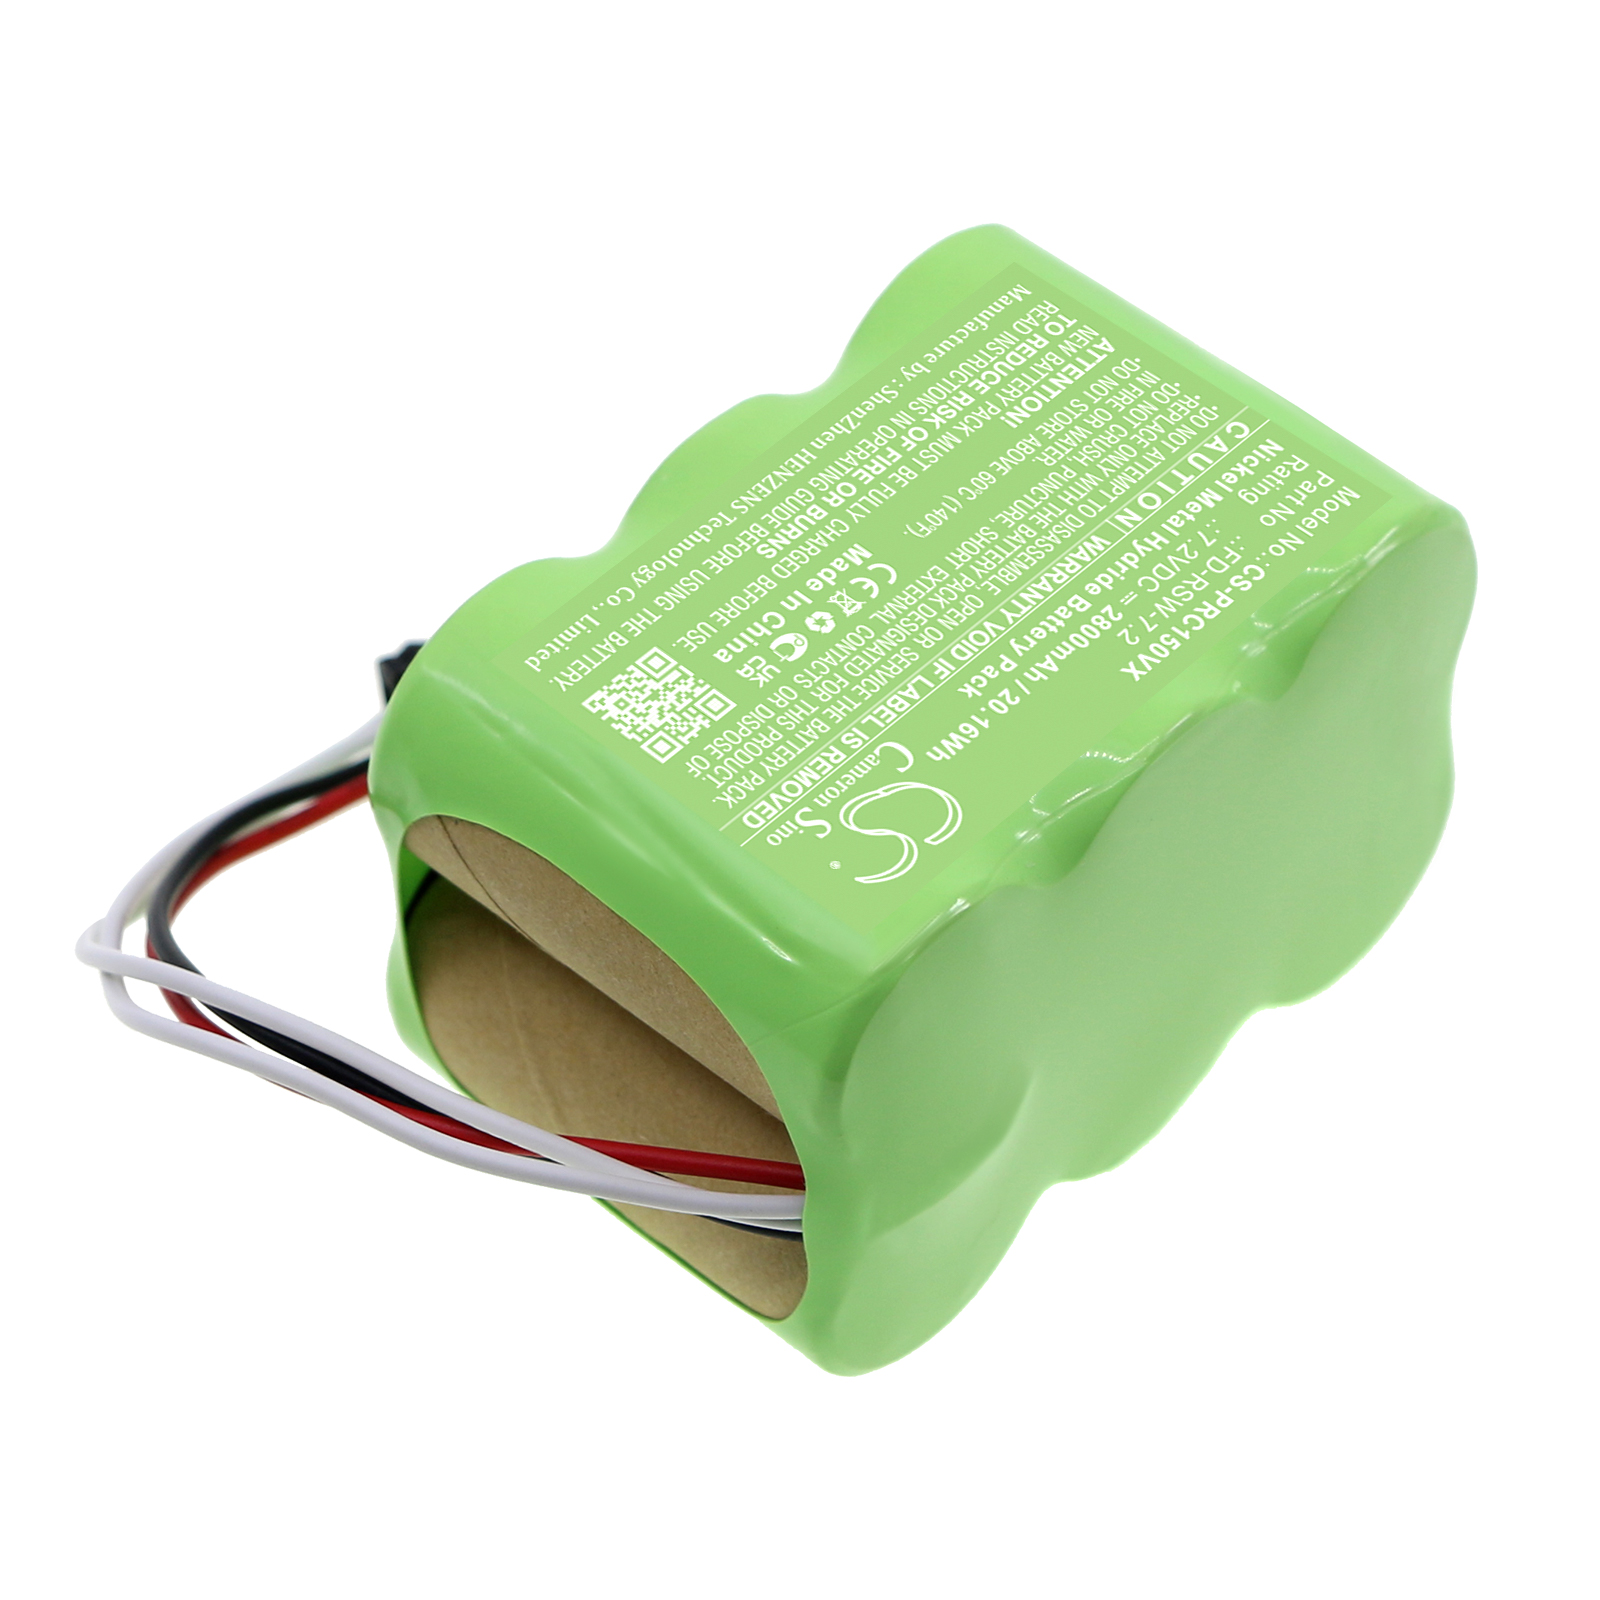 Cameron Sino Battery for Pyle PUCRC15 PUCRC15BAT PUCRC17 Pure FD-RSW-7.2 CS-PRC150VX 2800mAh